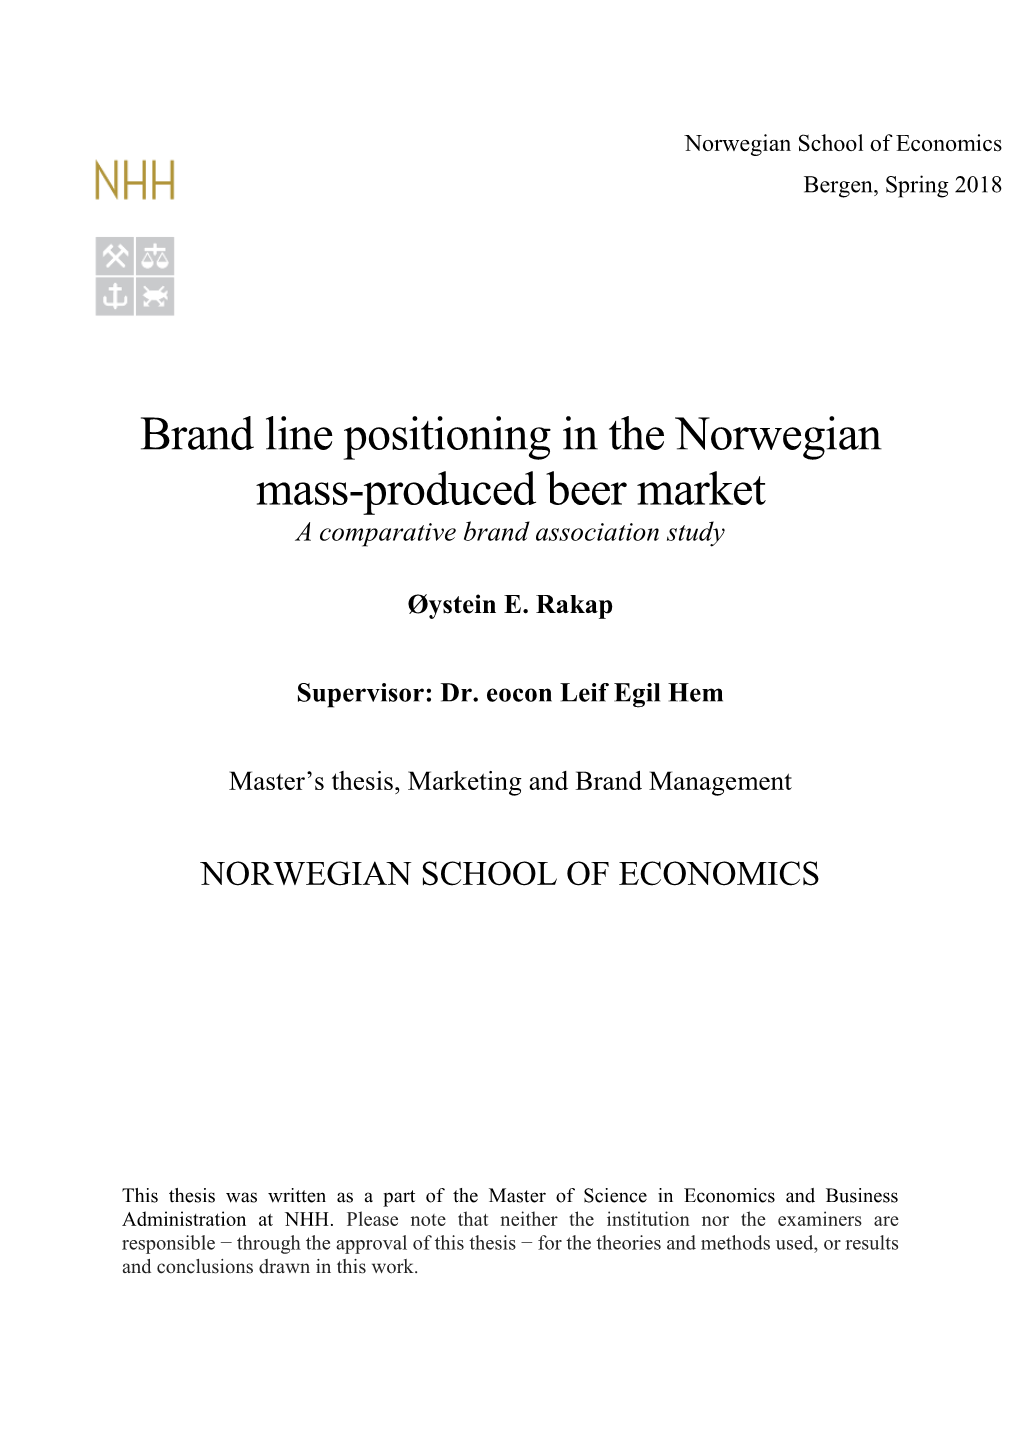 Brand Line Positioning in the Norwegian Mass-Produced Beer Market a Comparative Brand Association Study